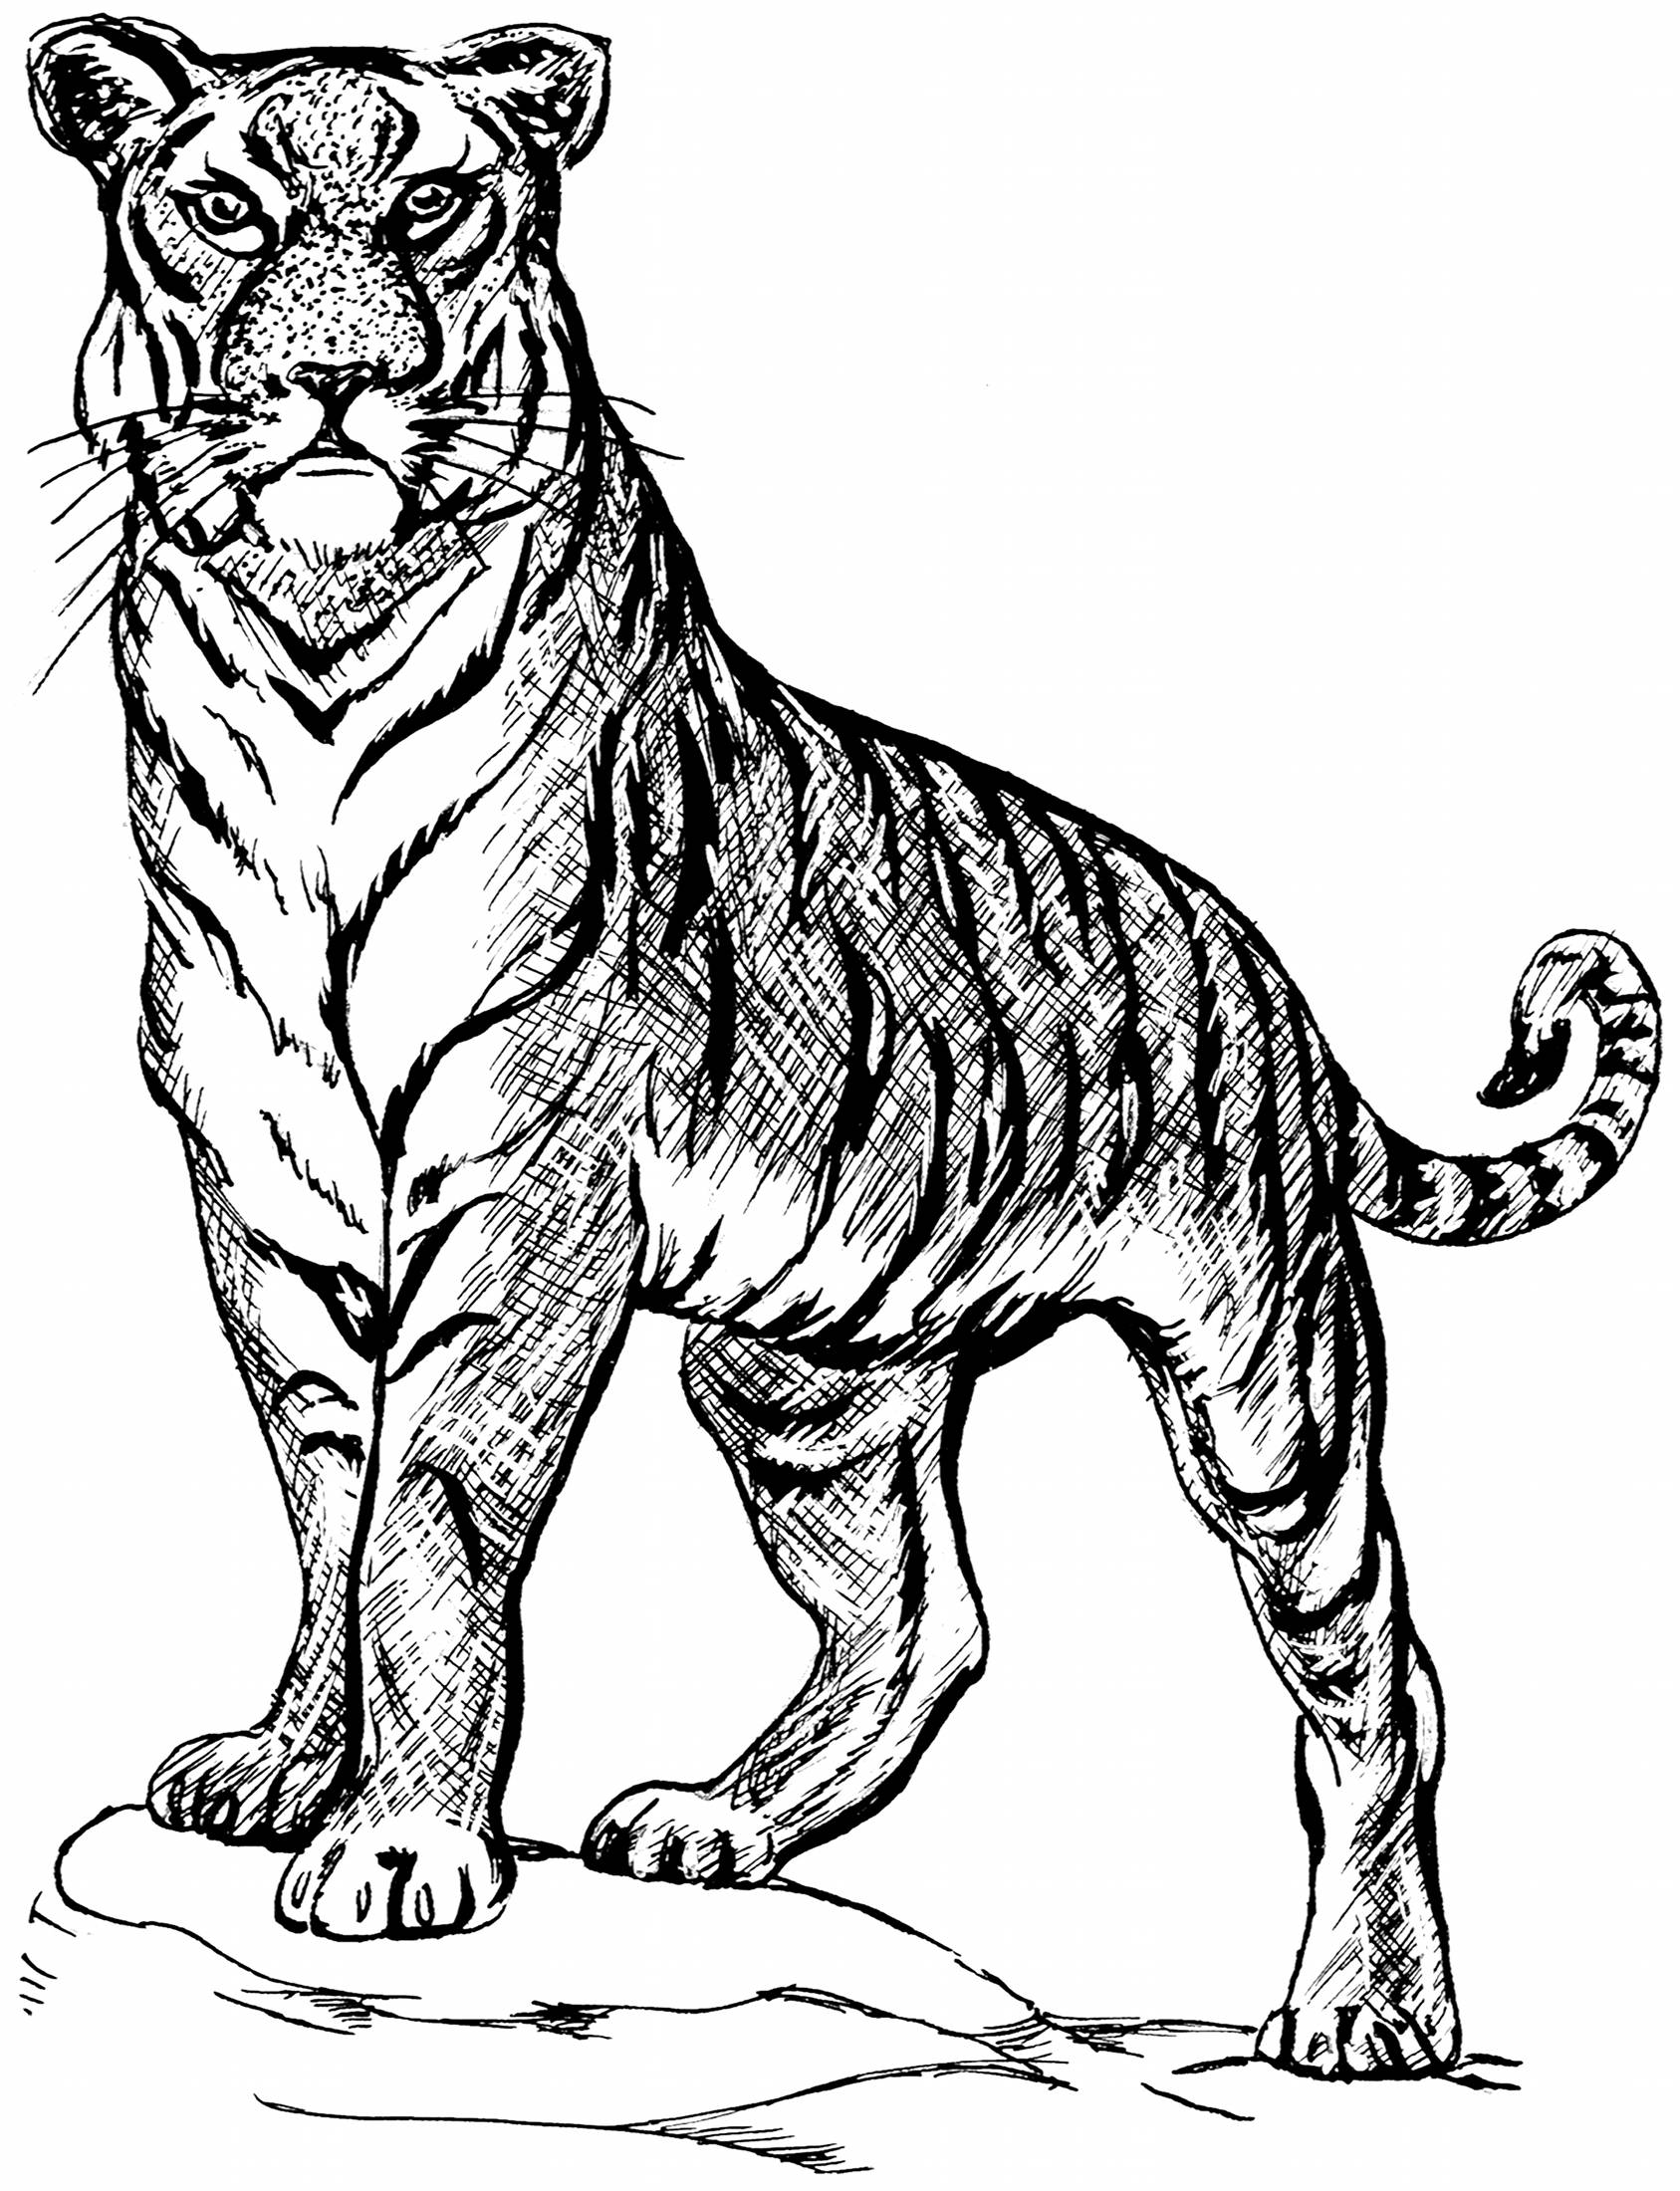 Tiger Line Drawings For Coloring